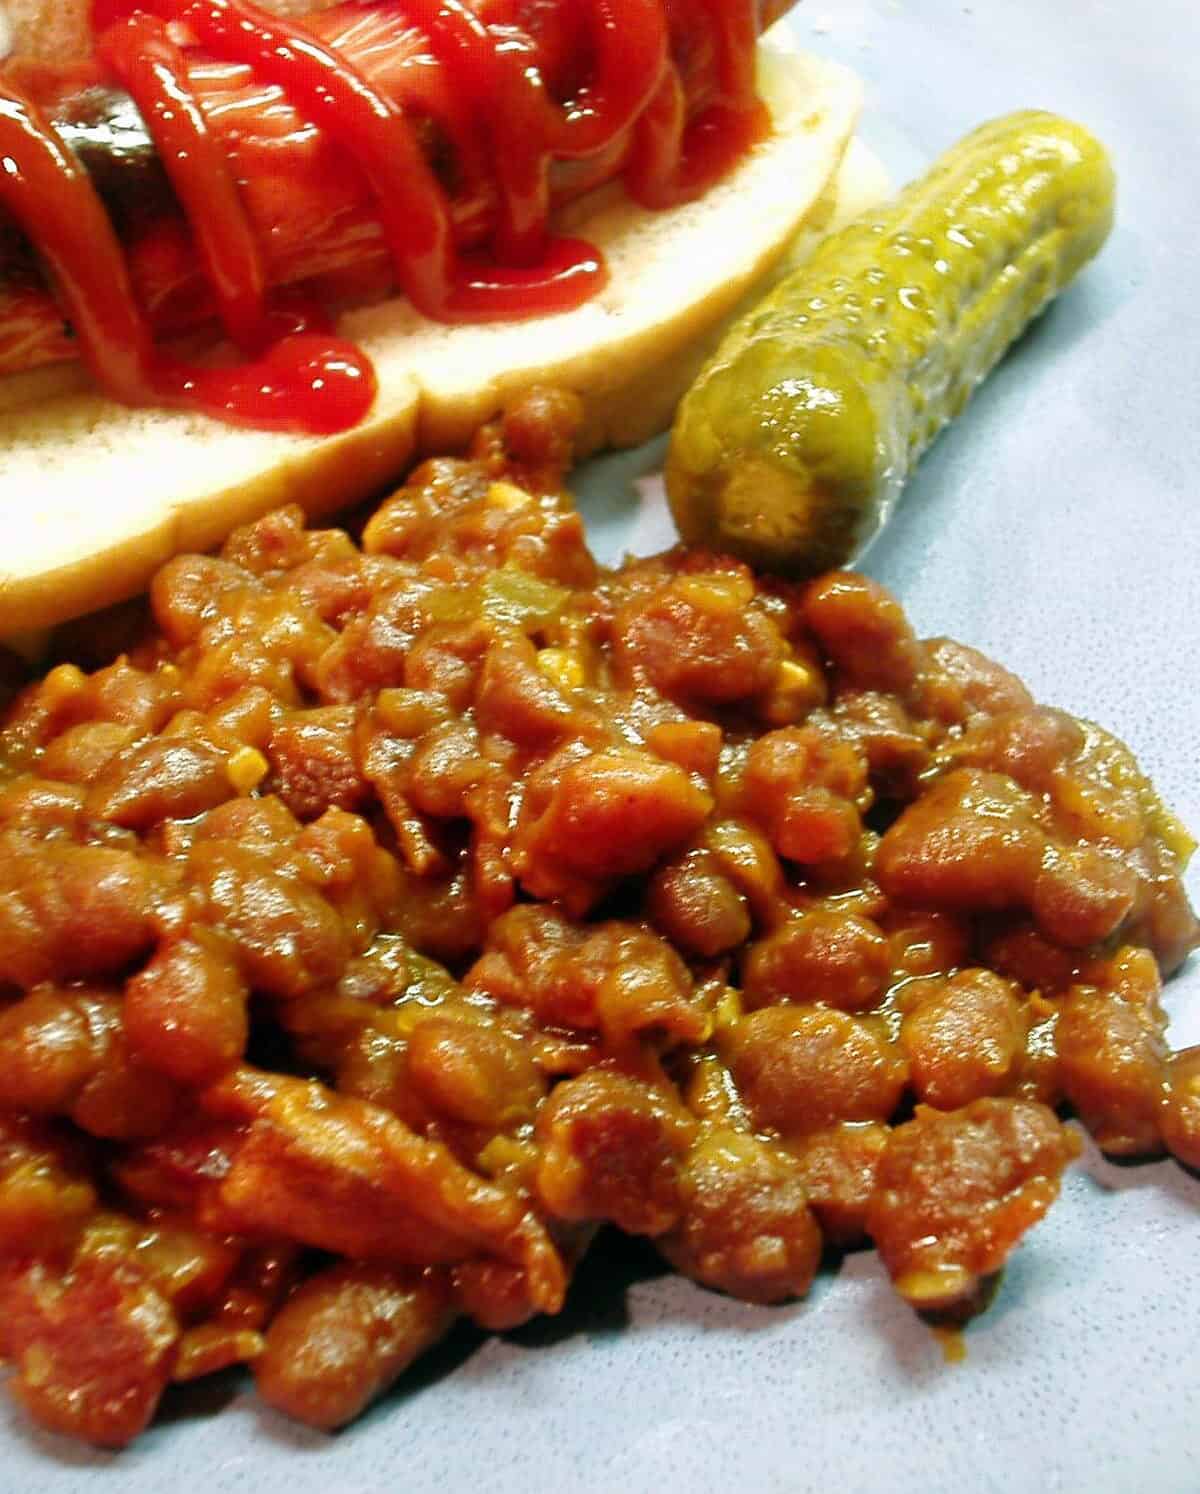  One bite of these baked beans, and you'll know they're worth the wait - trust me!